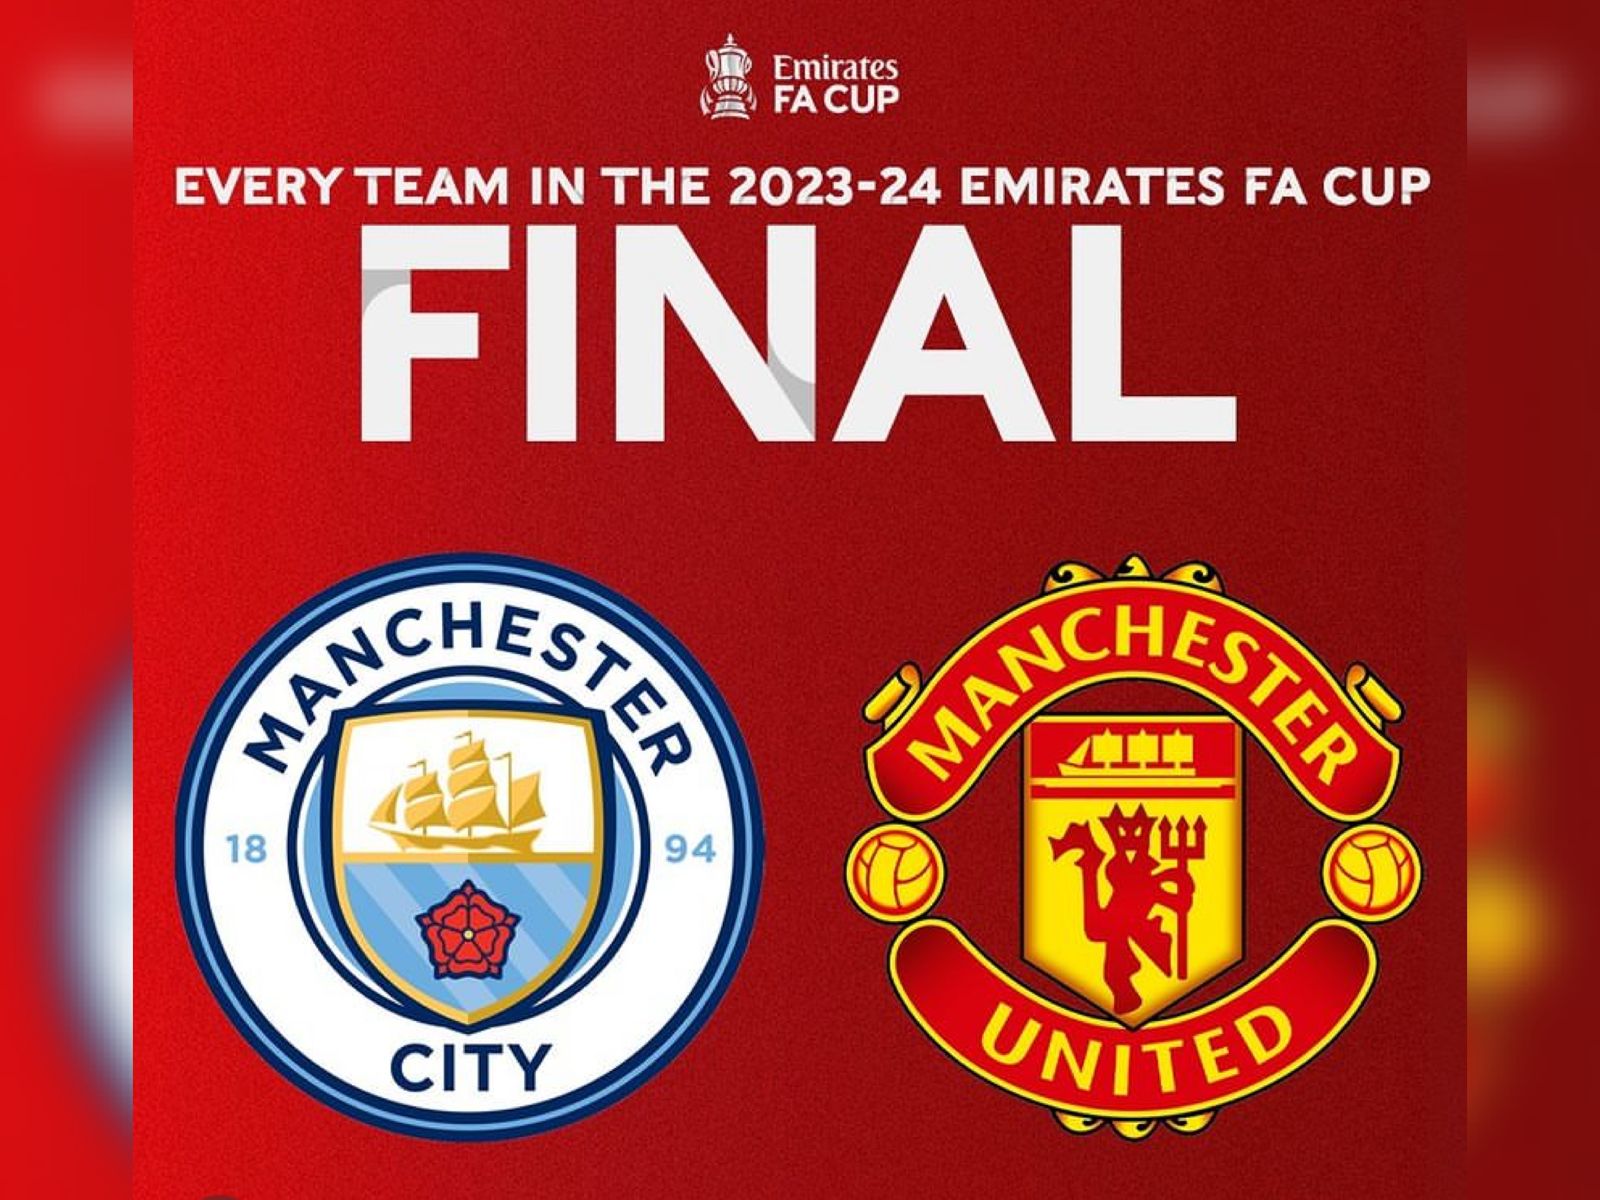 Jadwal Final FA Cup 2023-2024 Manchester United vs Manchester City, Misi Balas Dendam The Red Devils